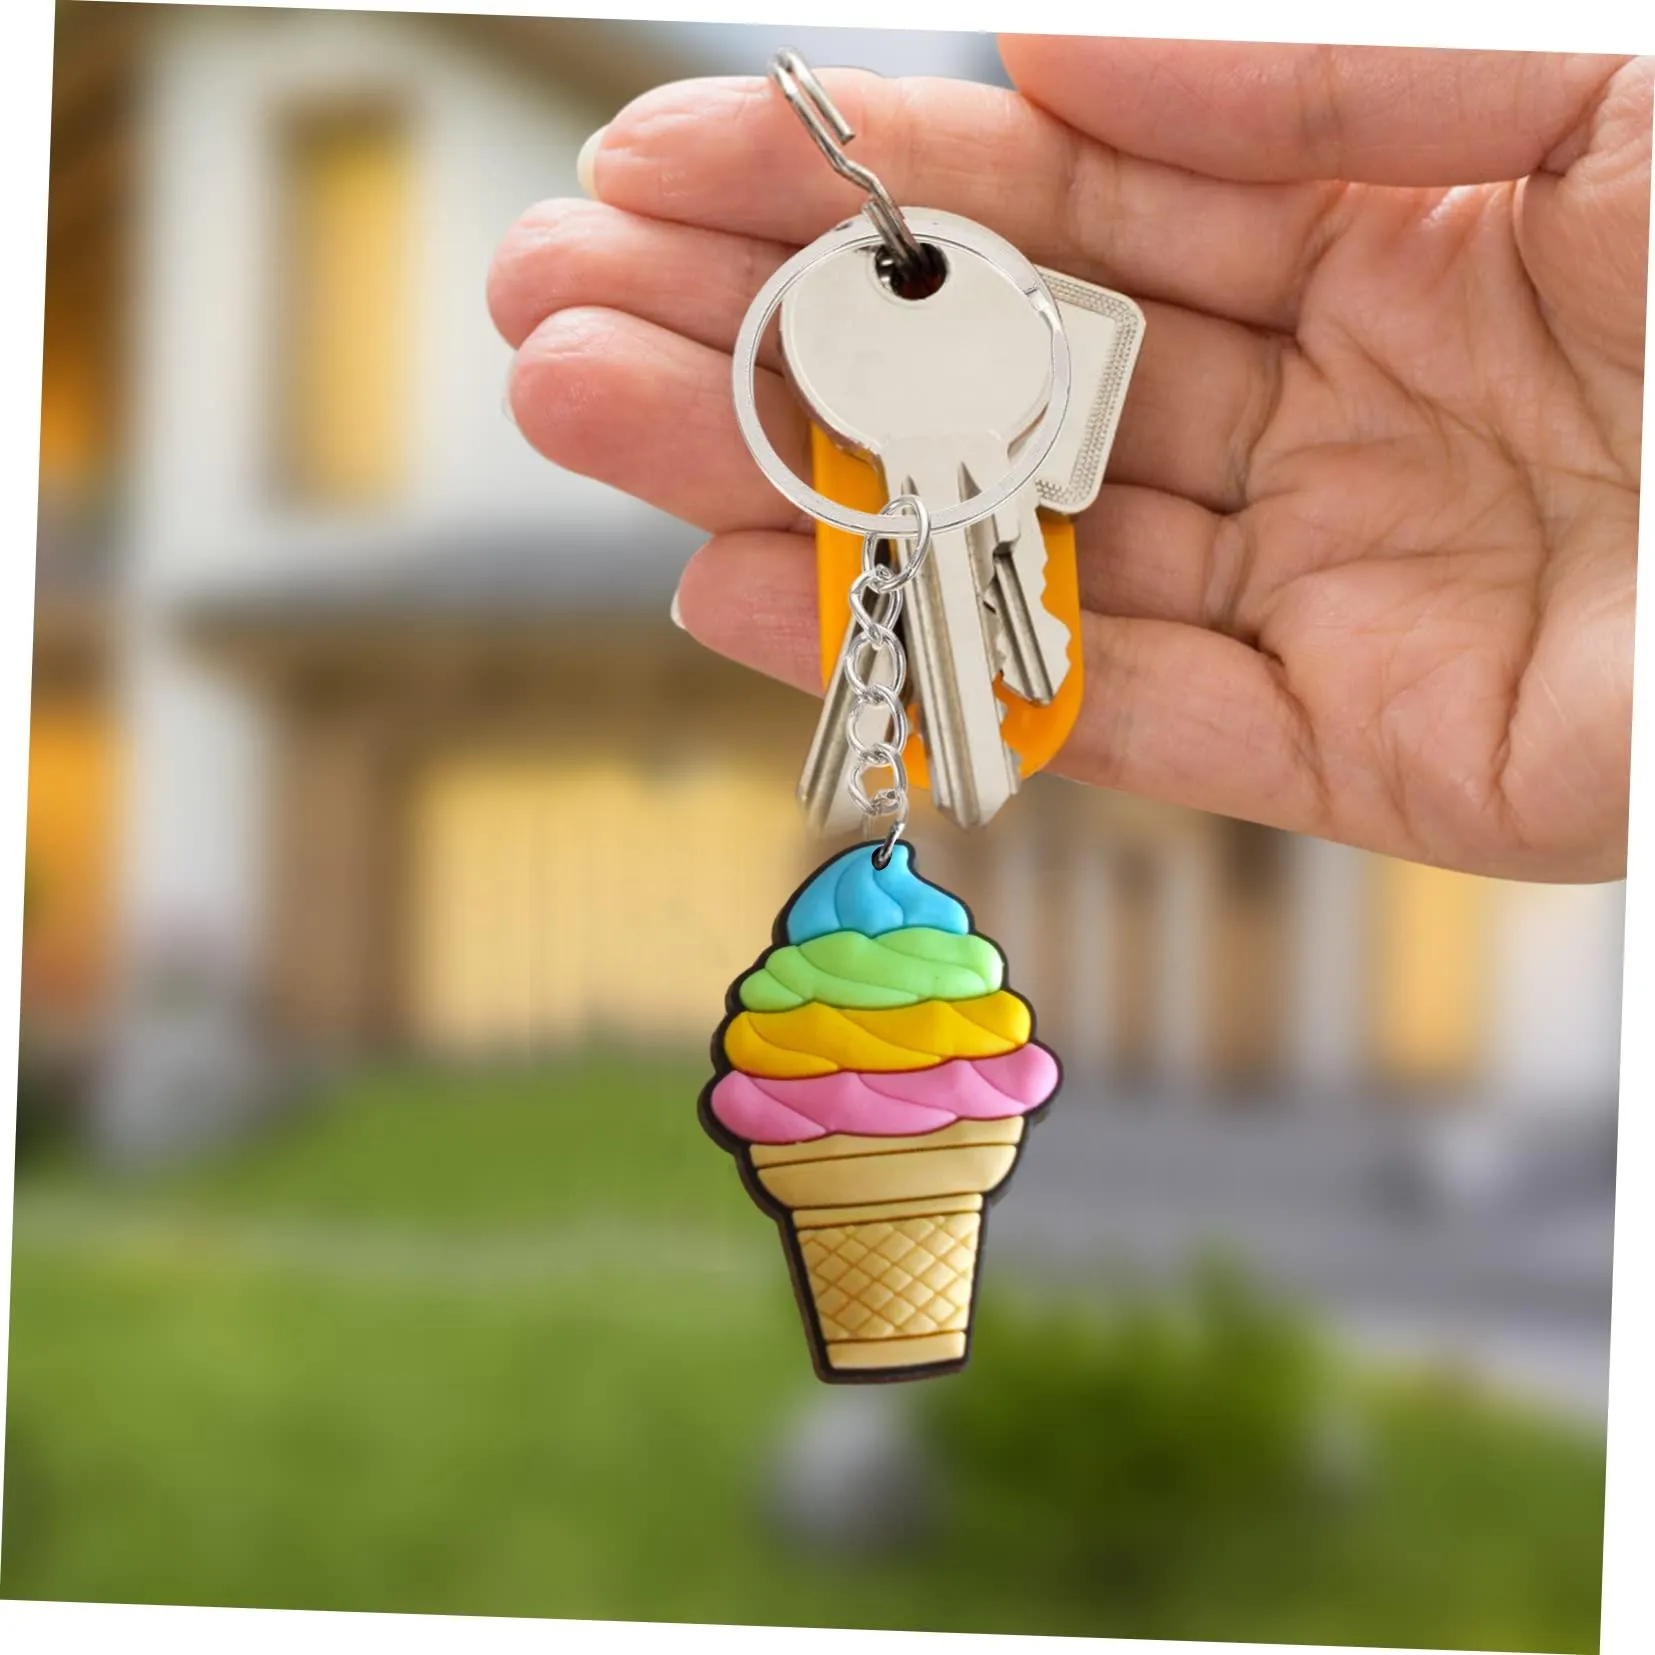 ice cream 2 10 keychain anime cool keychains for backpacks key chain ring christmas gift fans men keyring suitable schoolbag car bag women tags goodie stuffer gifts and holiday charms